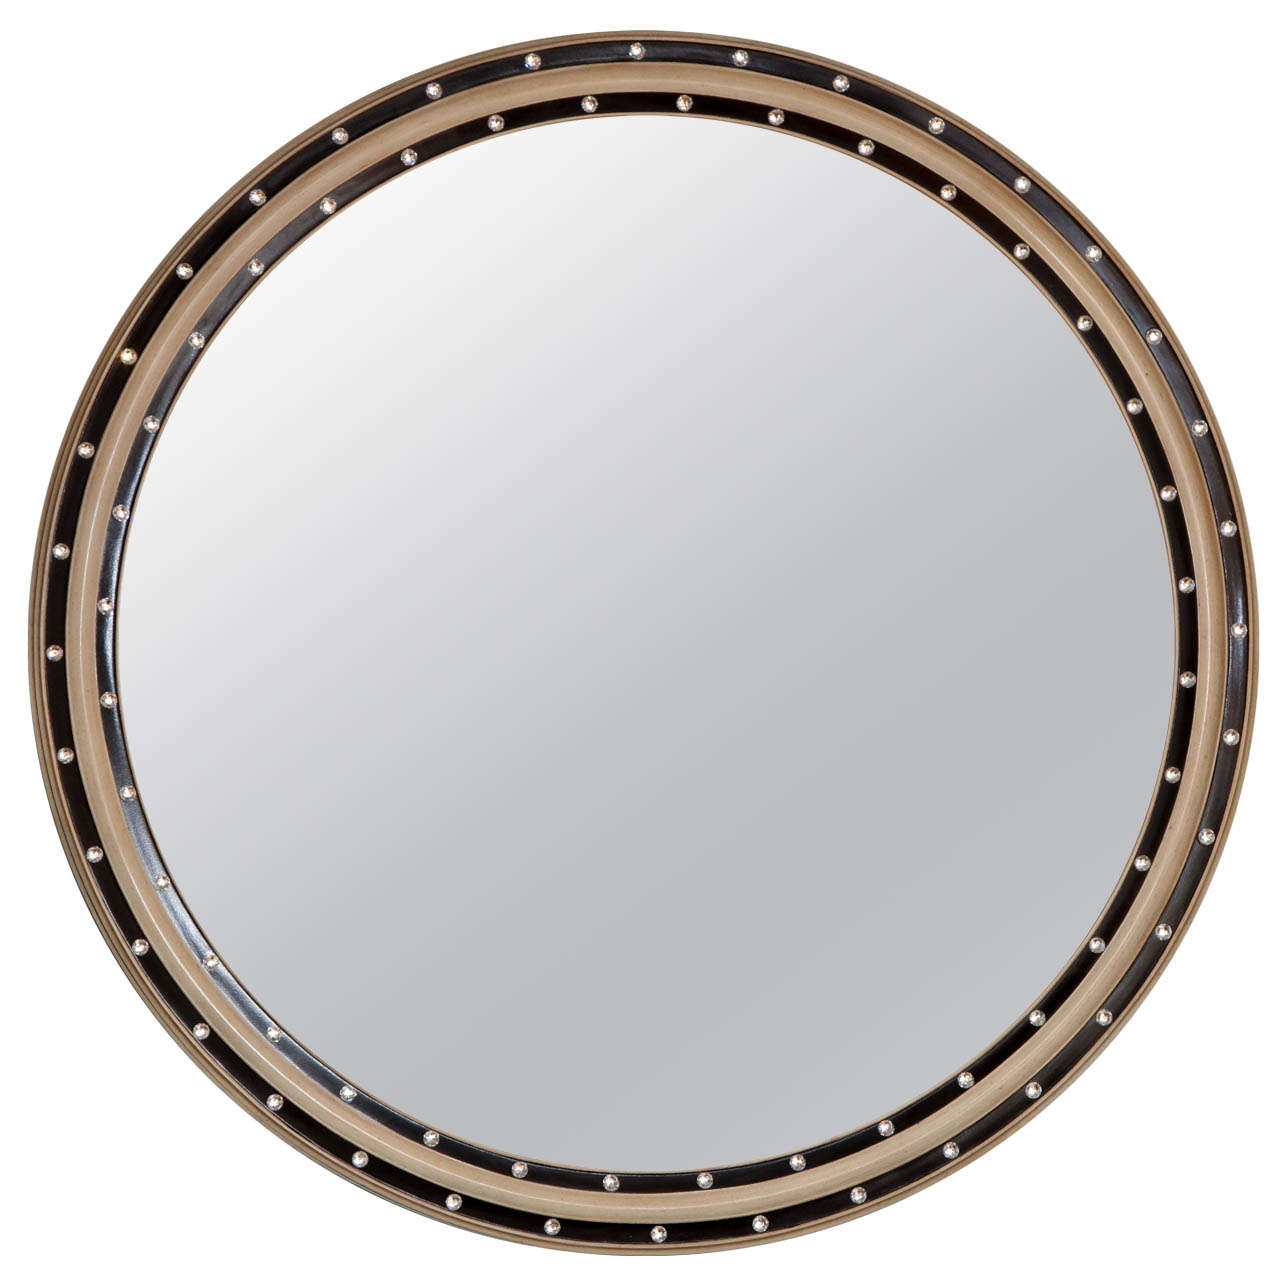 New Round Painted Wall Mirror with Swarovski Crystals For Sale